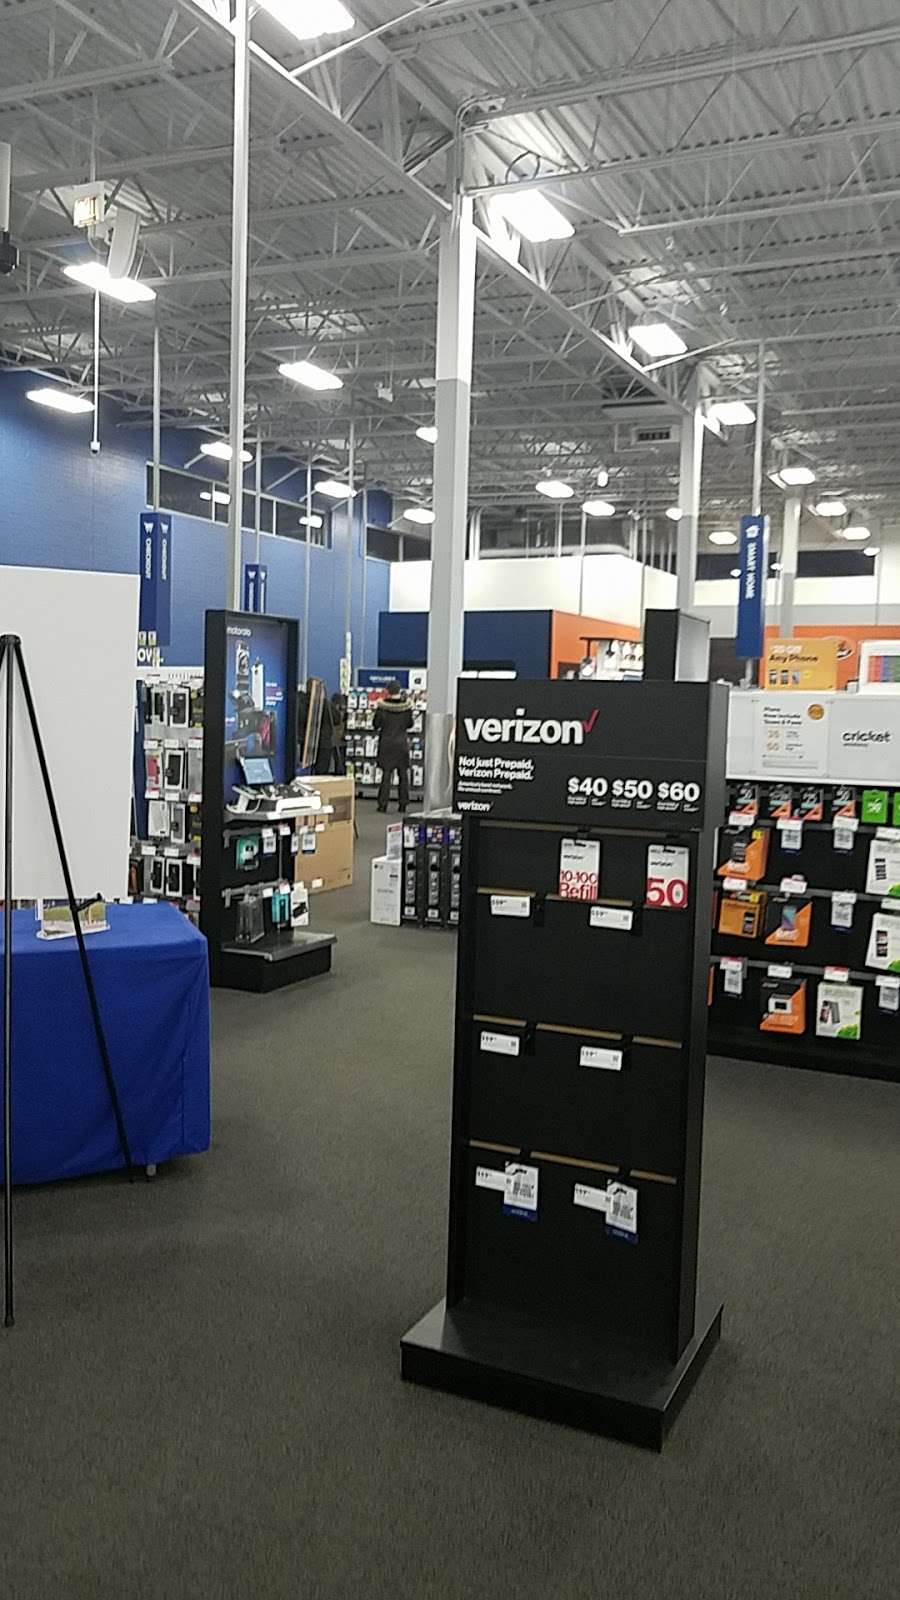 Best Buy | 2100 N Elston Ave, Chicago, IL 60614, USA | Phone: (773) 486-0142